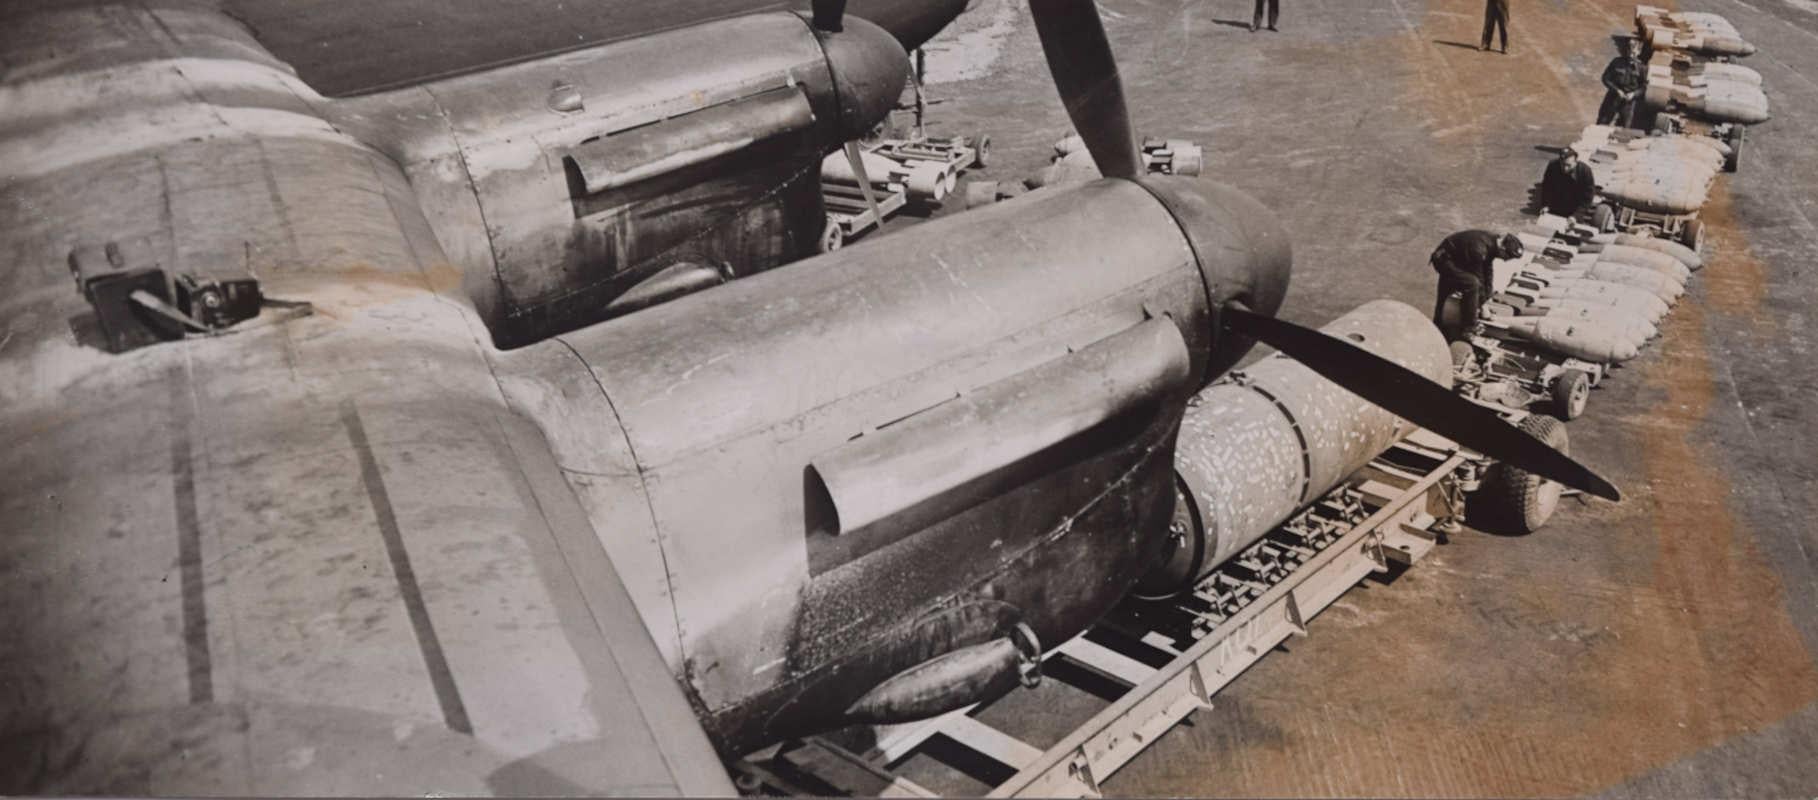 Unknown Black and White Photograph - Avro Lancaster Bomber arming D-Day +1 original 1944 photograph undercarriage 